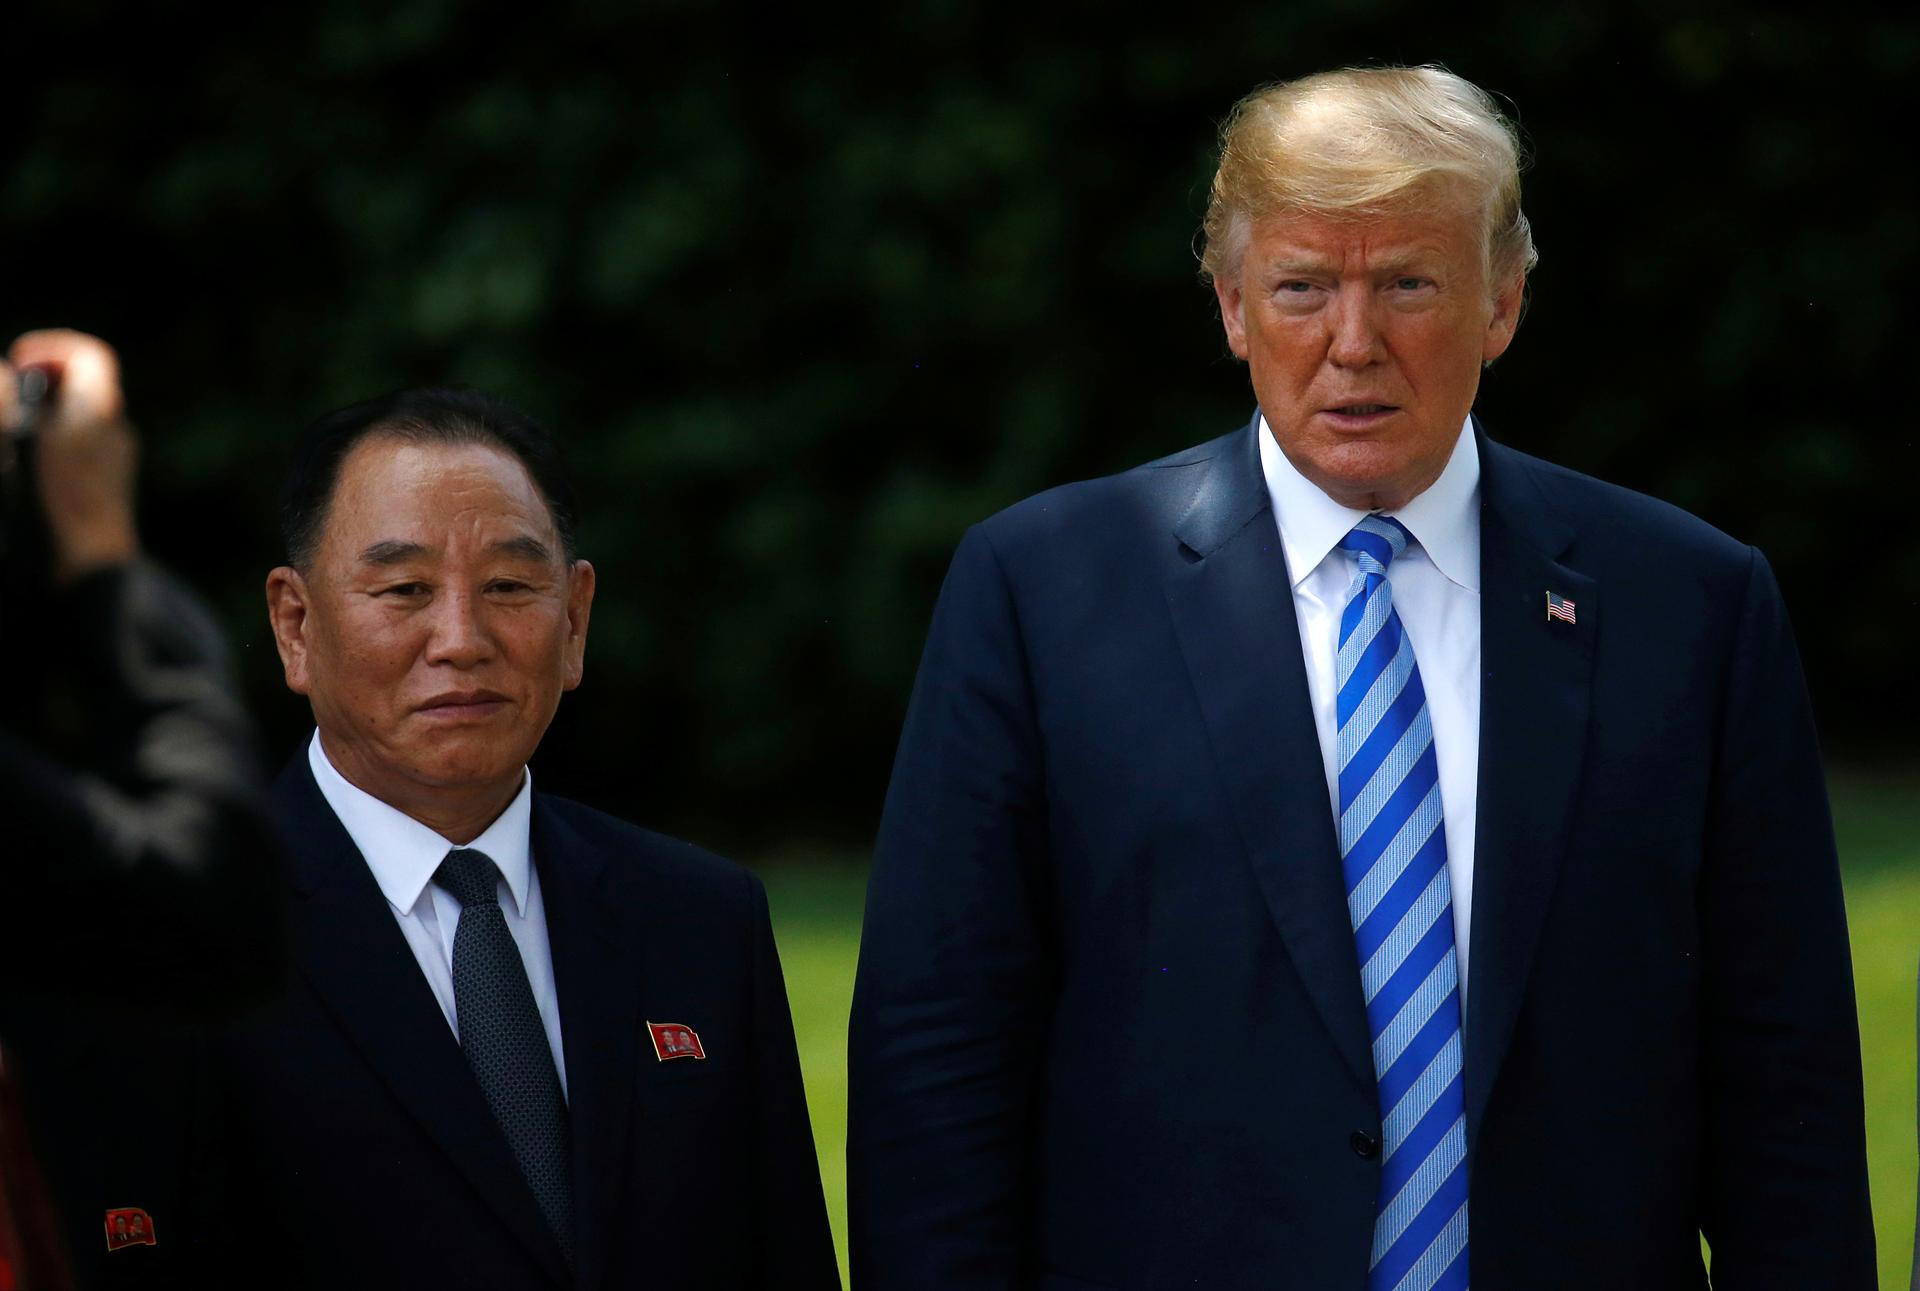 North Korean envoy Kim Yong-chol, the country's former spy chief and current vice-chairman of the Central Committee of the Workers' Party of Korea, poses with President Donald Trump after a meeting at the White House in Washington, DC, June 1, 2018. Kim Y